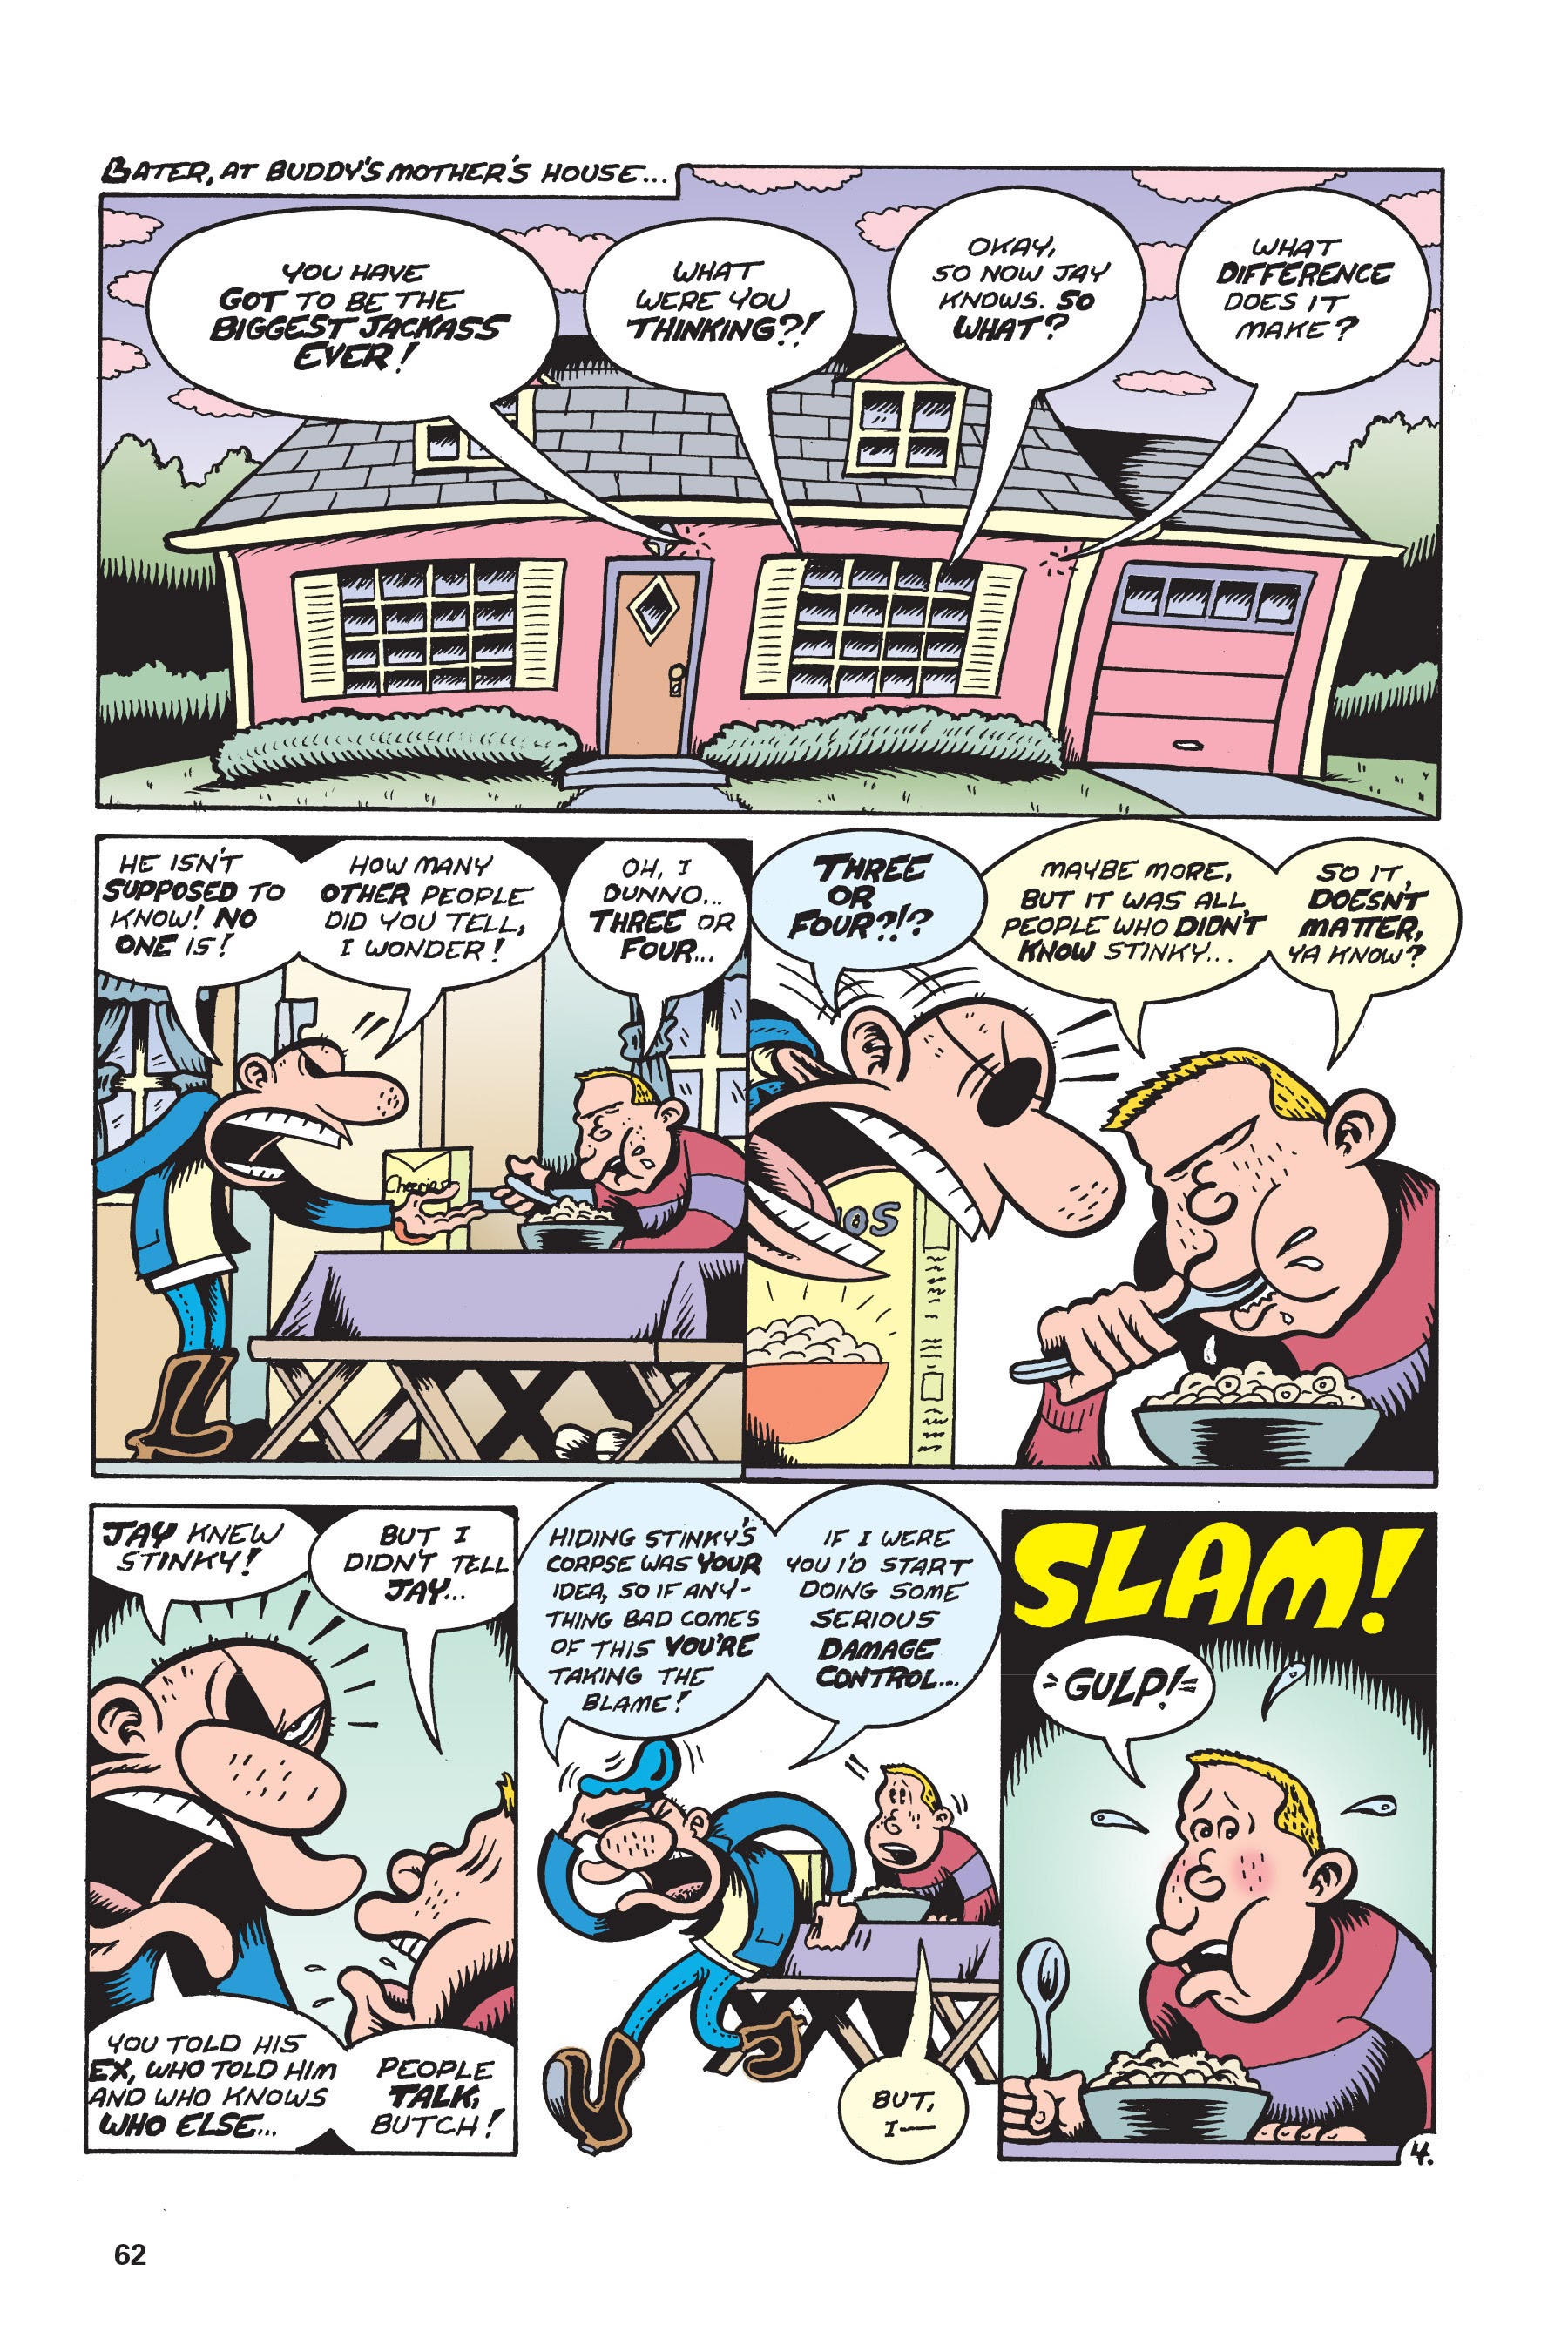 Read online Buddy Buys a Dump comic -  Issue # TPB - 62